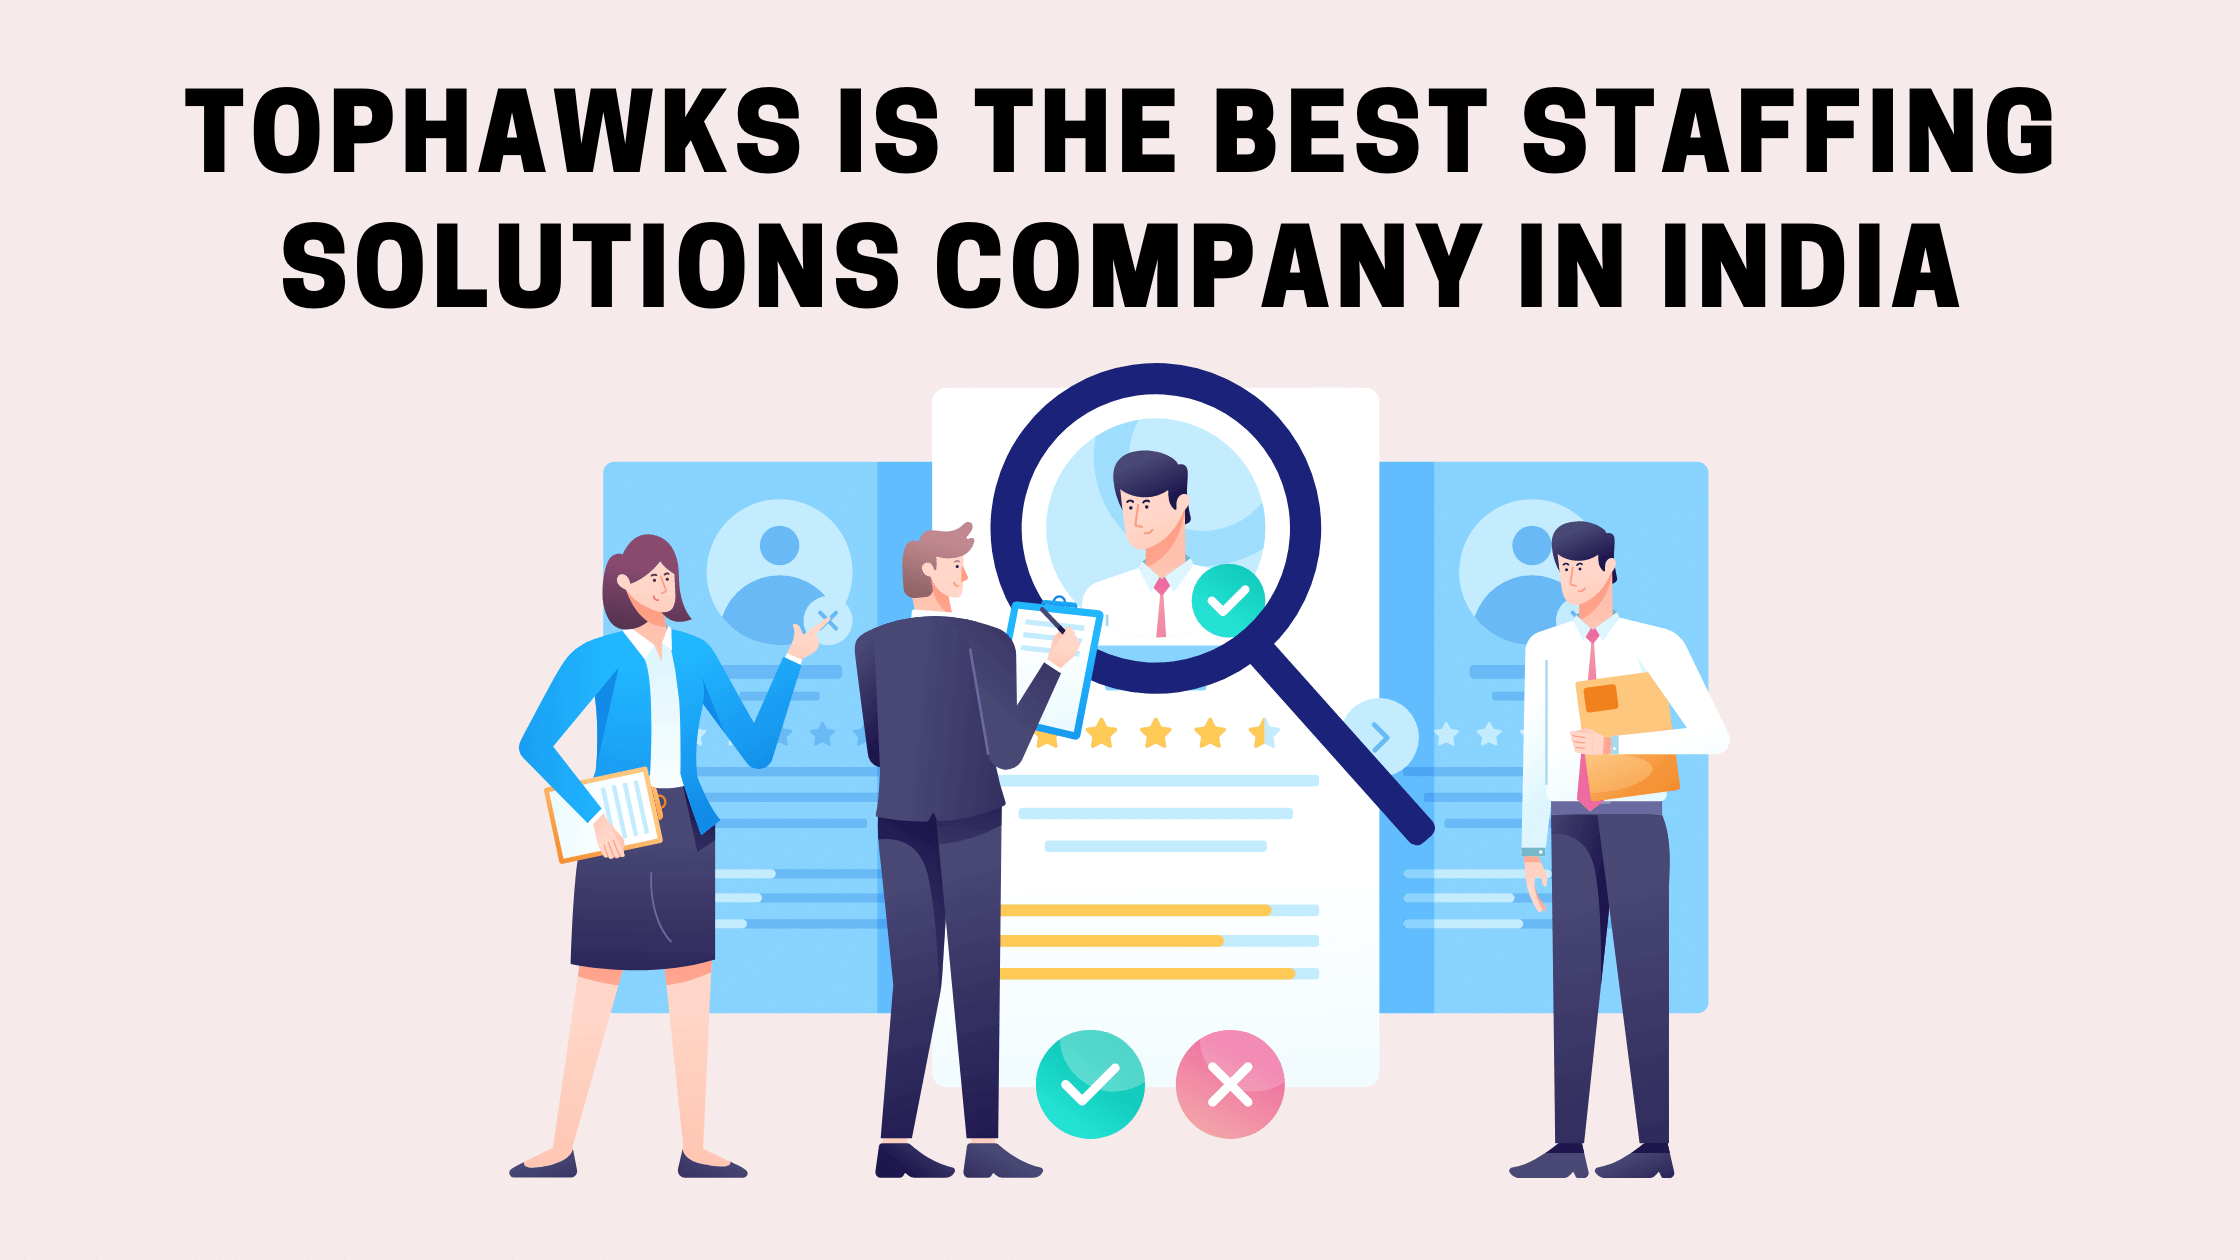 TopHawks: Leading Staffing Solutions Company in India